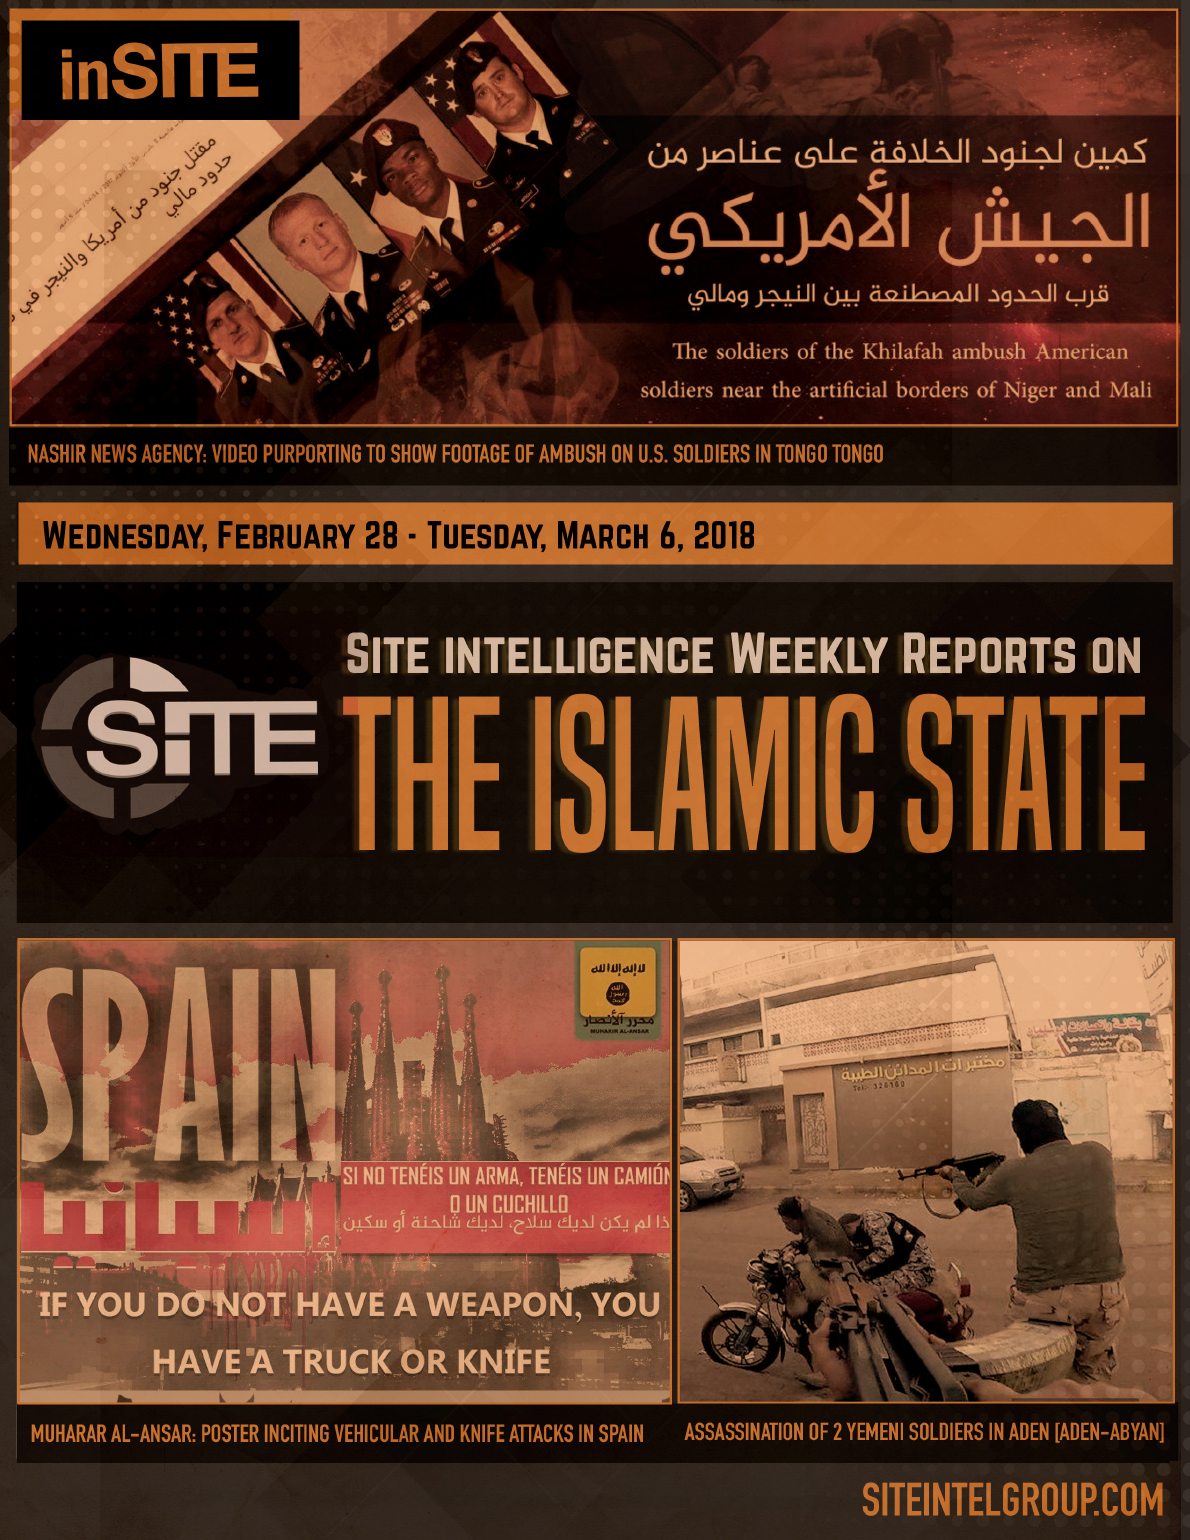 Weekly inSITE on the Islamic State for February 28-March 6, 2018